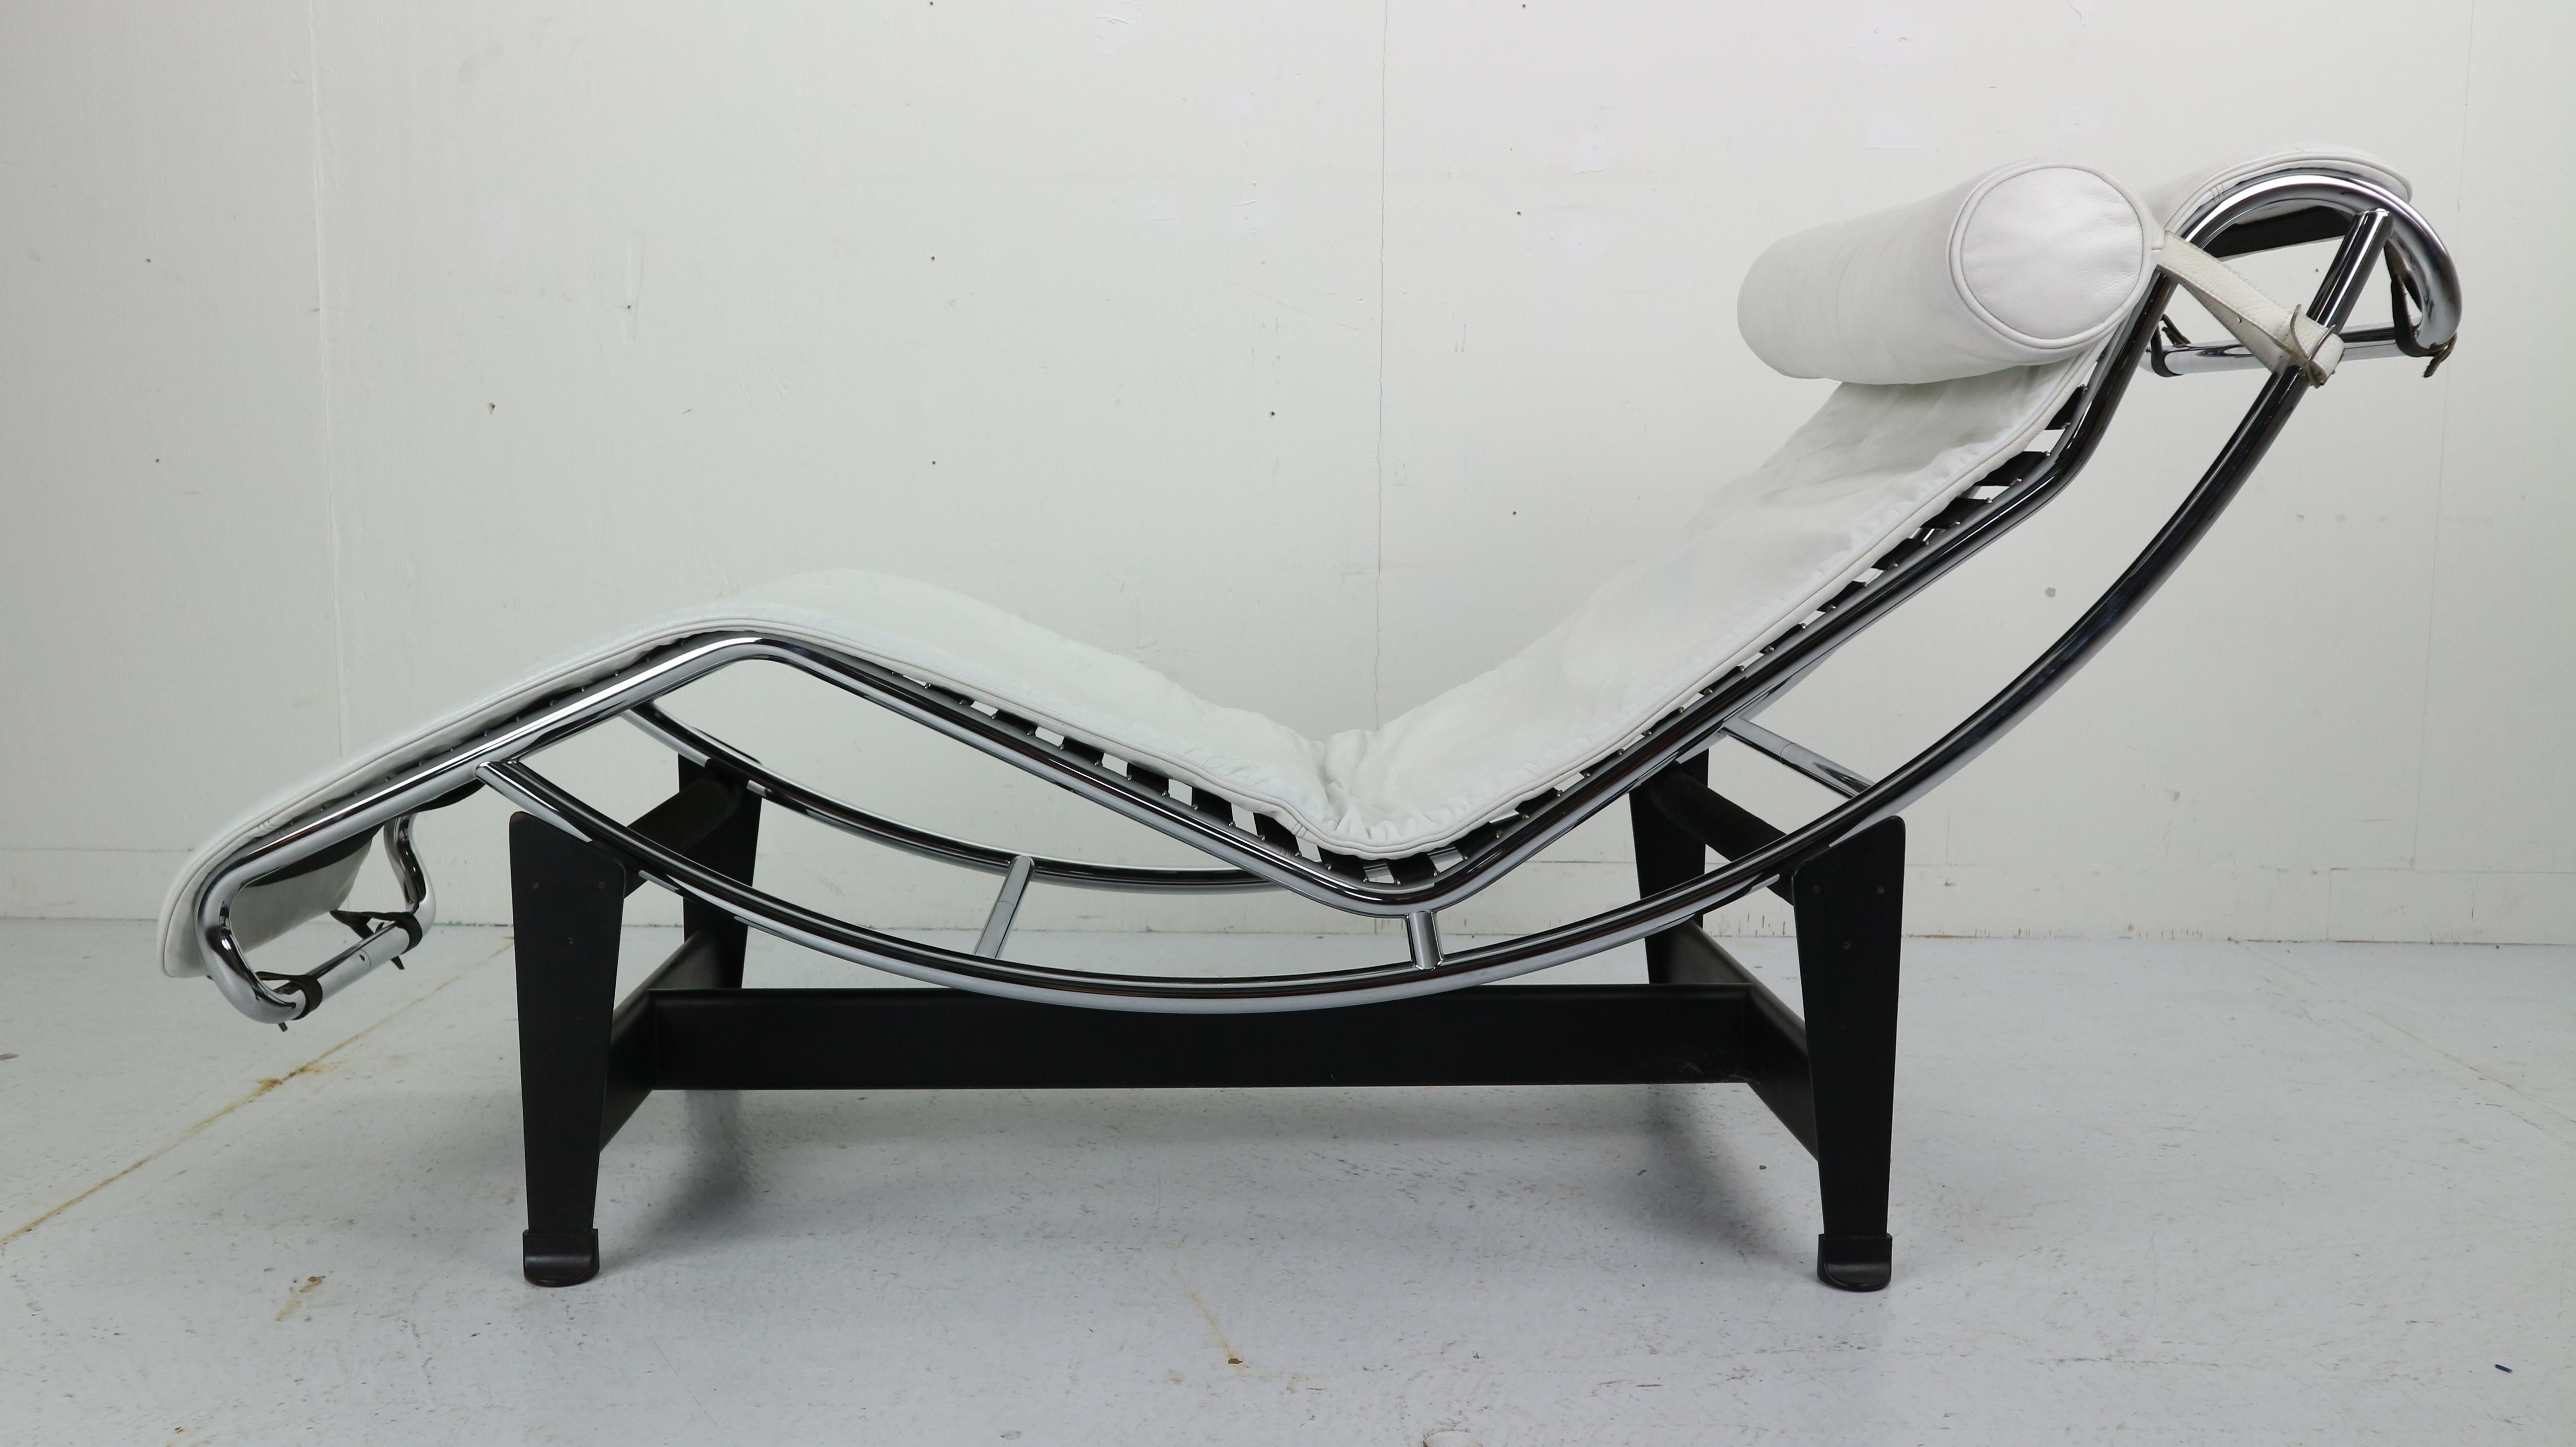 Beautiful white leather LC4 chaise longue. Designed by Le Corbusier/ Pierre Jeanneret/ Charlotte Perriand and produced by Cassina. It features the Classic chrome steel frame and a black Industrial base. Serialnumber 26165. Produced early 1980s in a